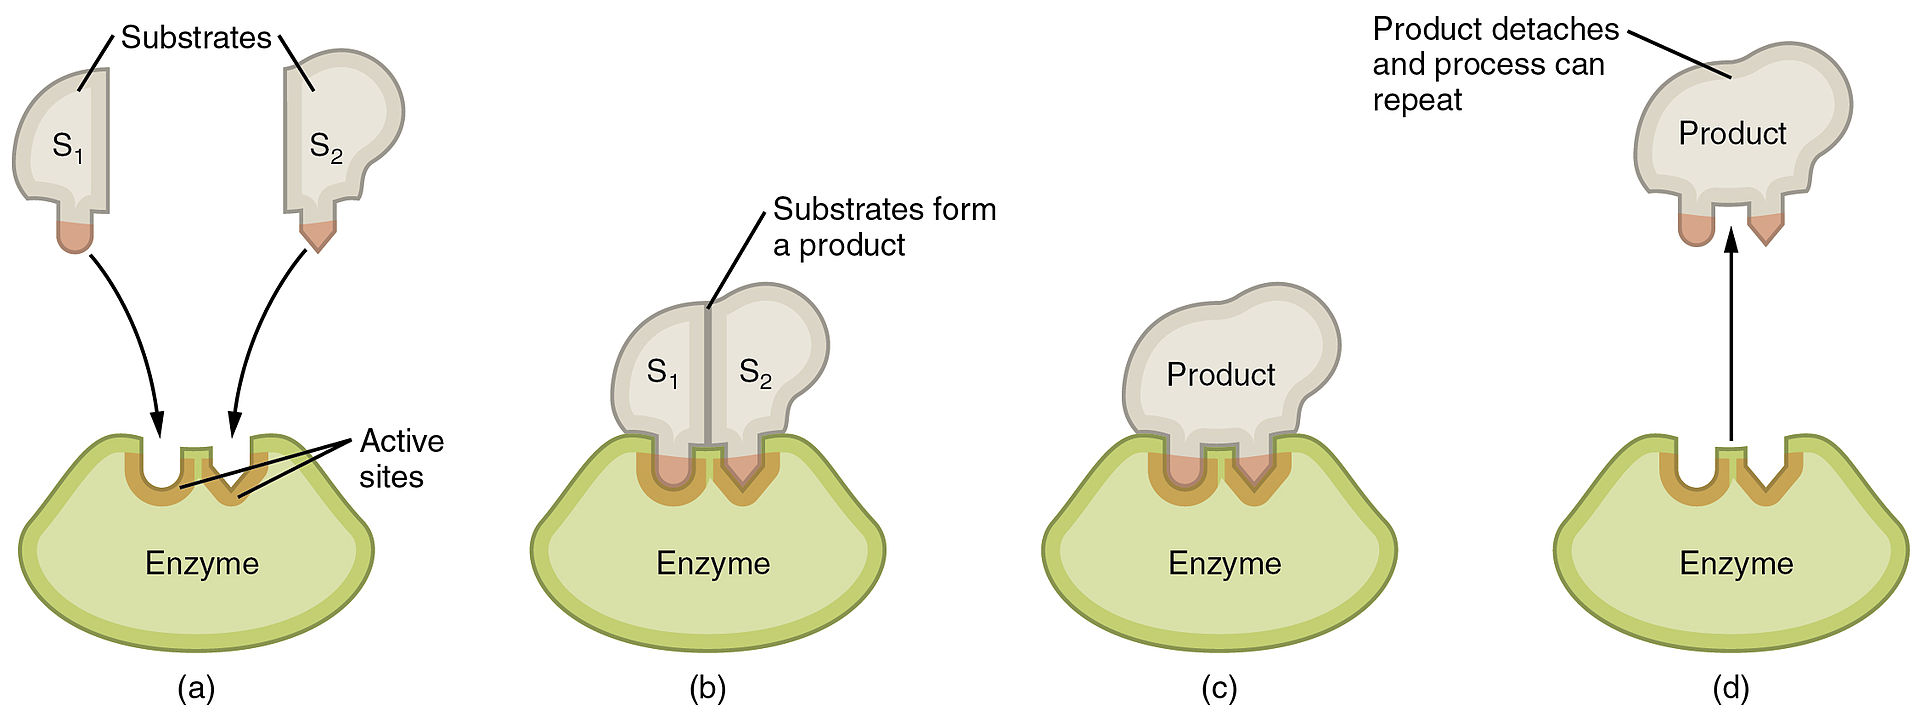 Compare Enzymatic and Non Enzymatic Reactions - What's the difference?